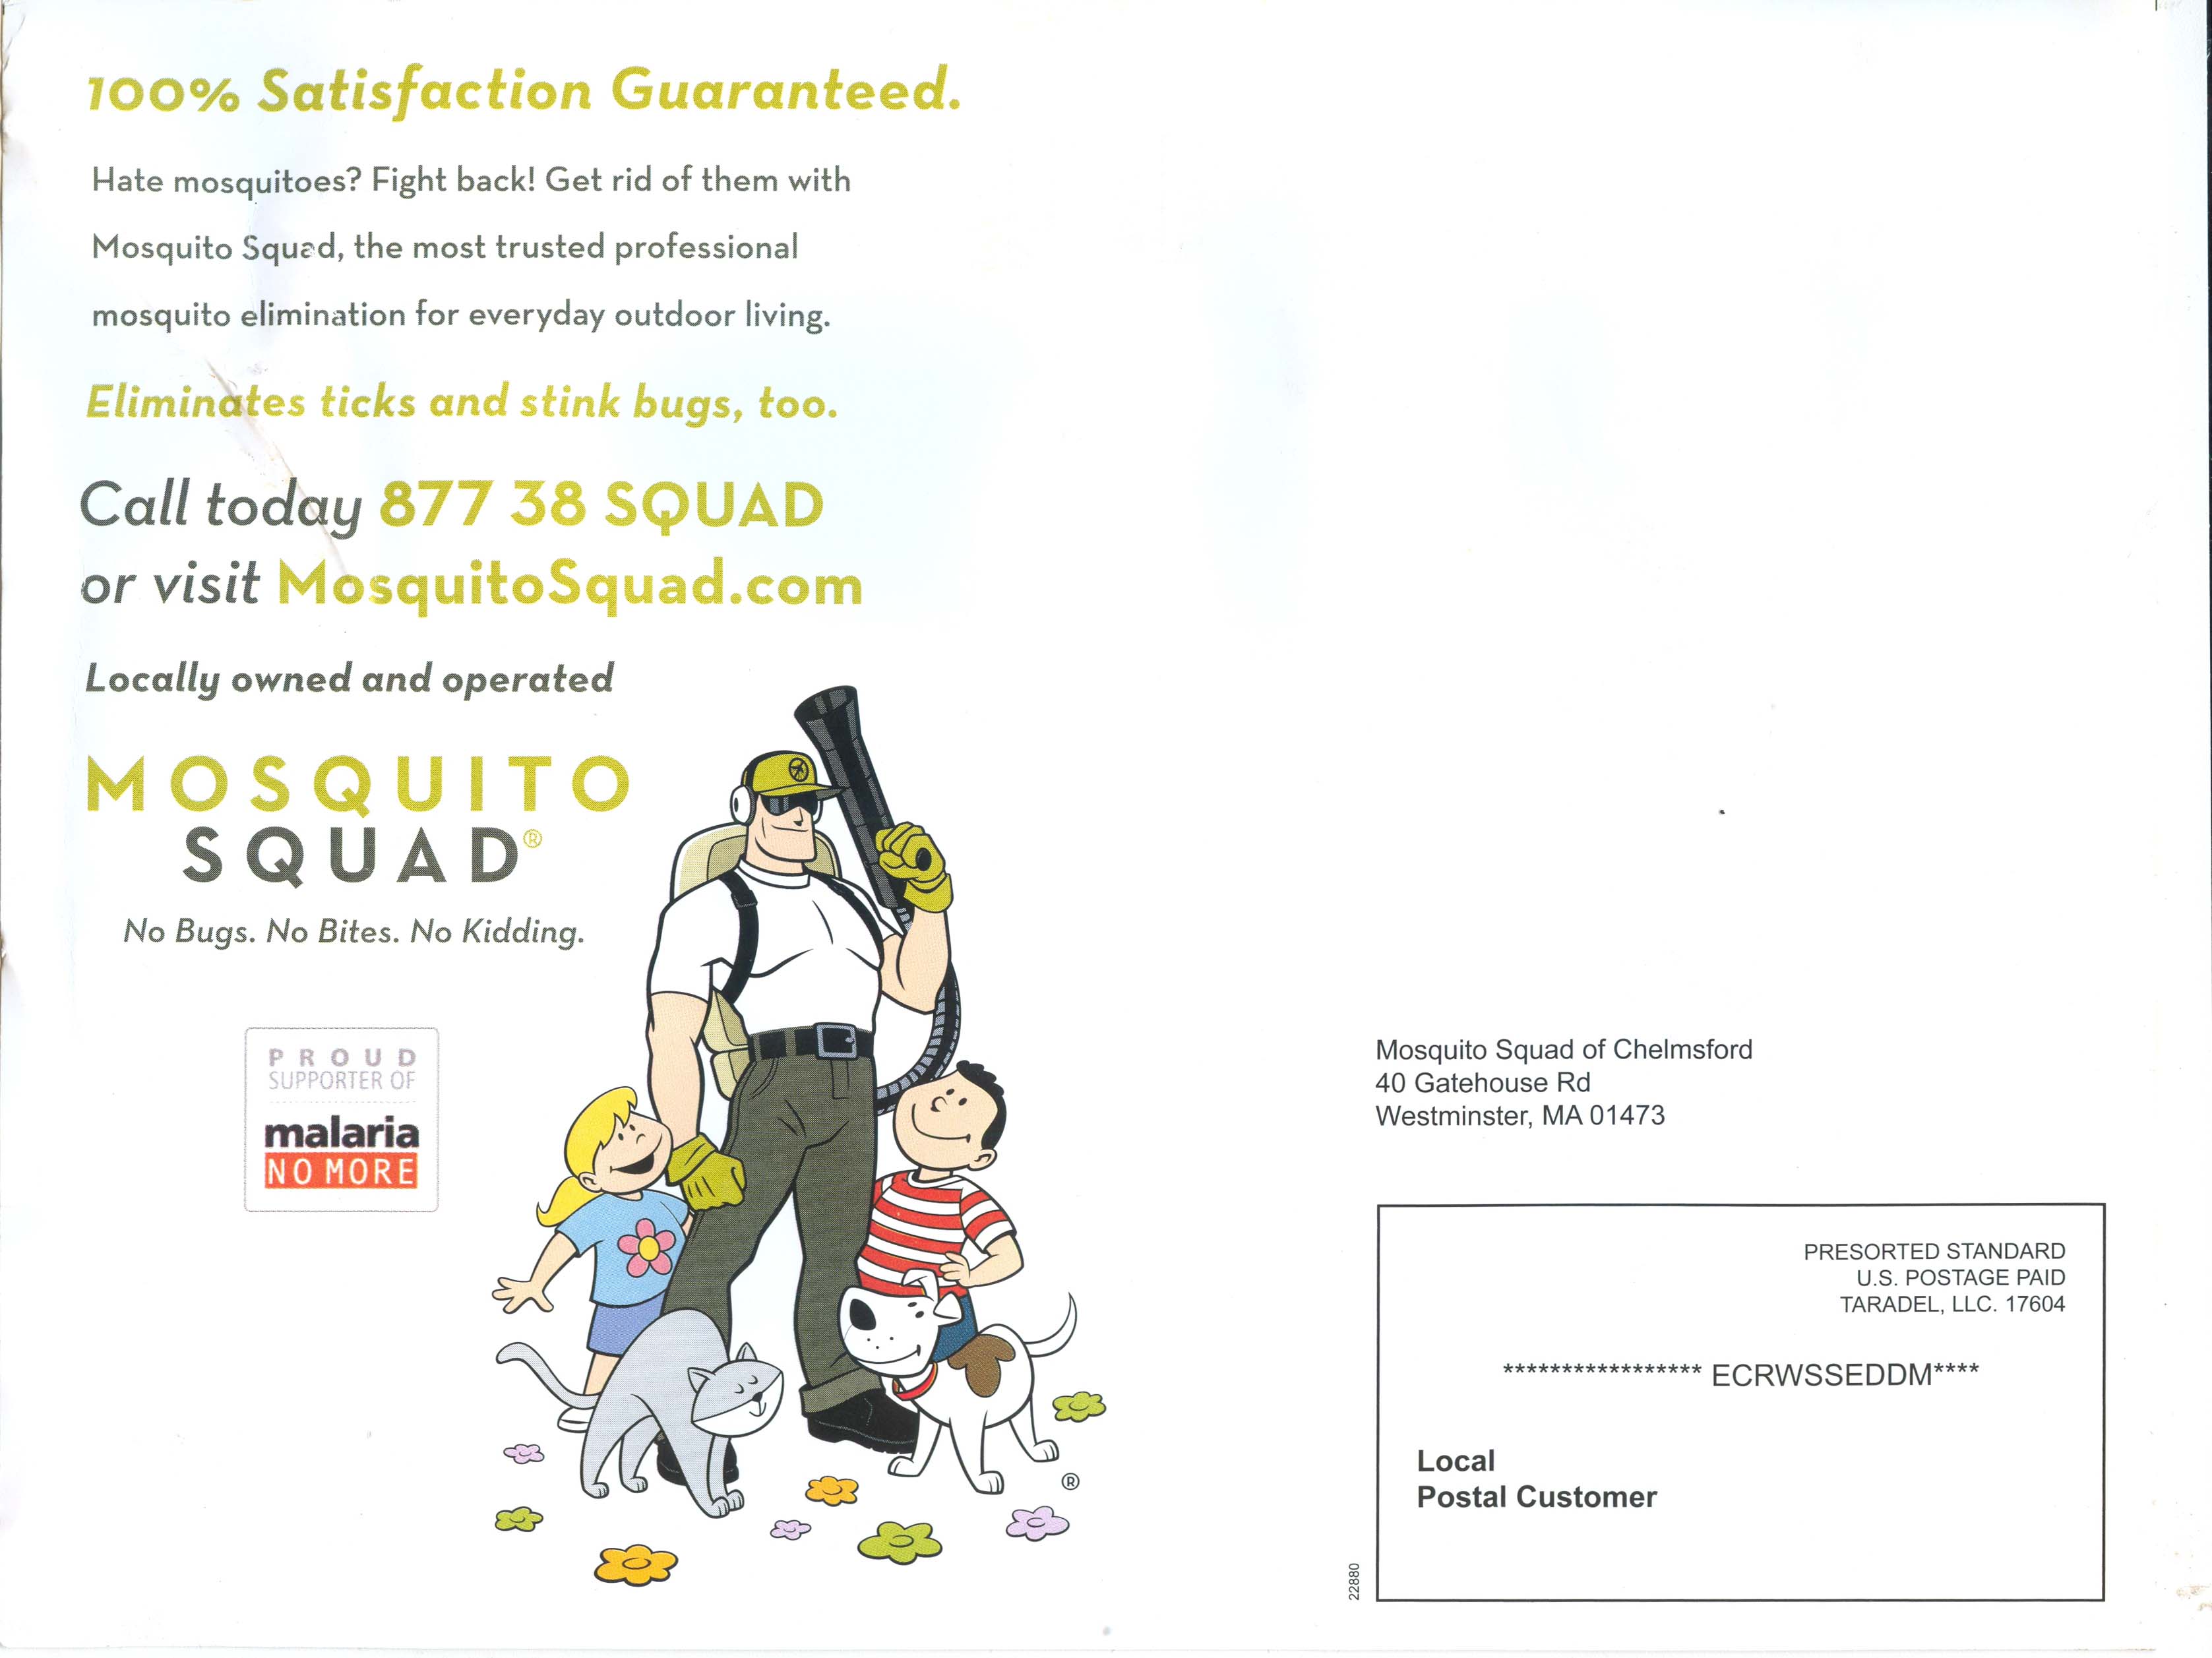 Mosquito Squad Oversized Post Card 2014 - Back